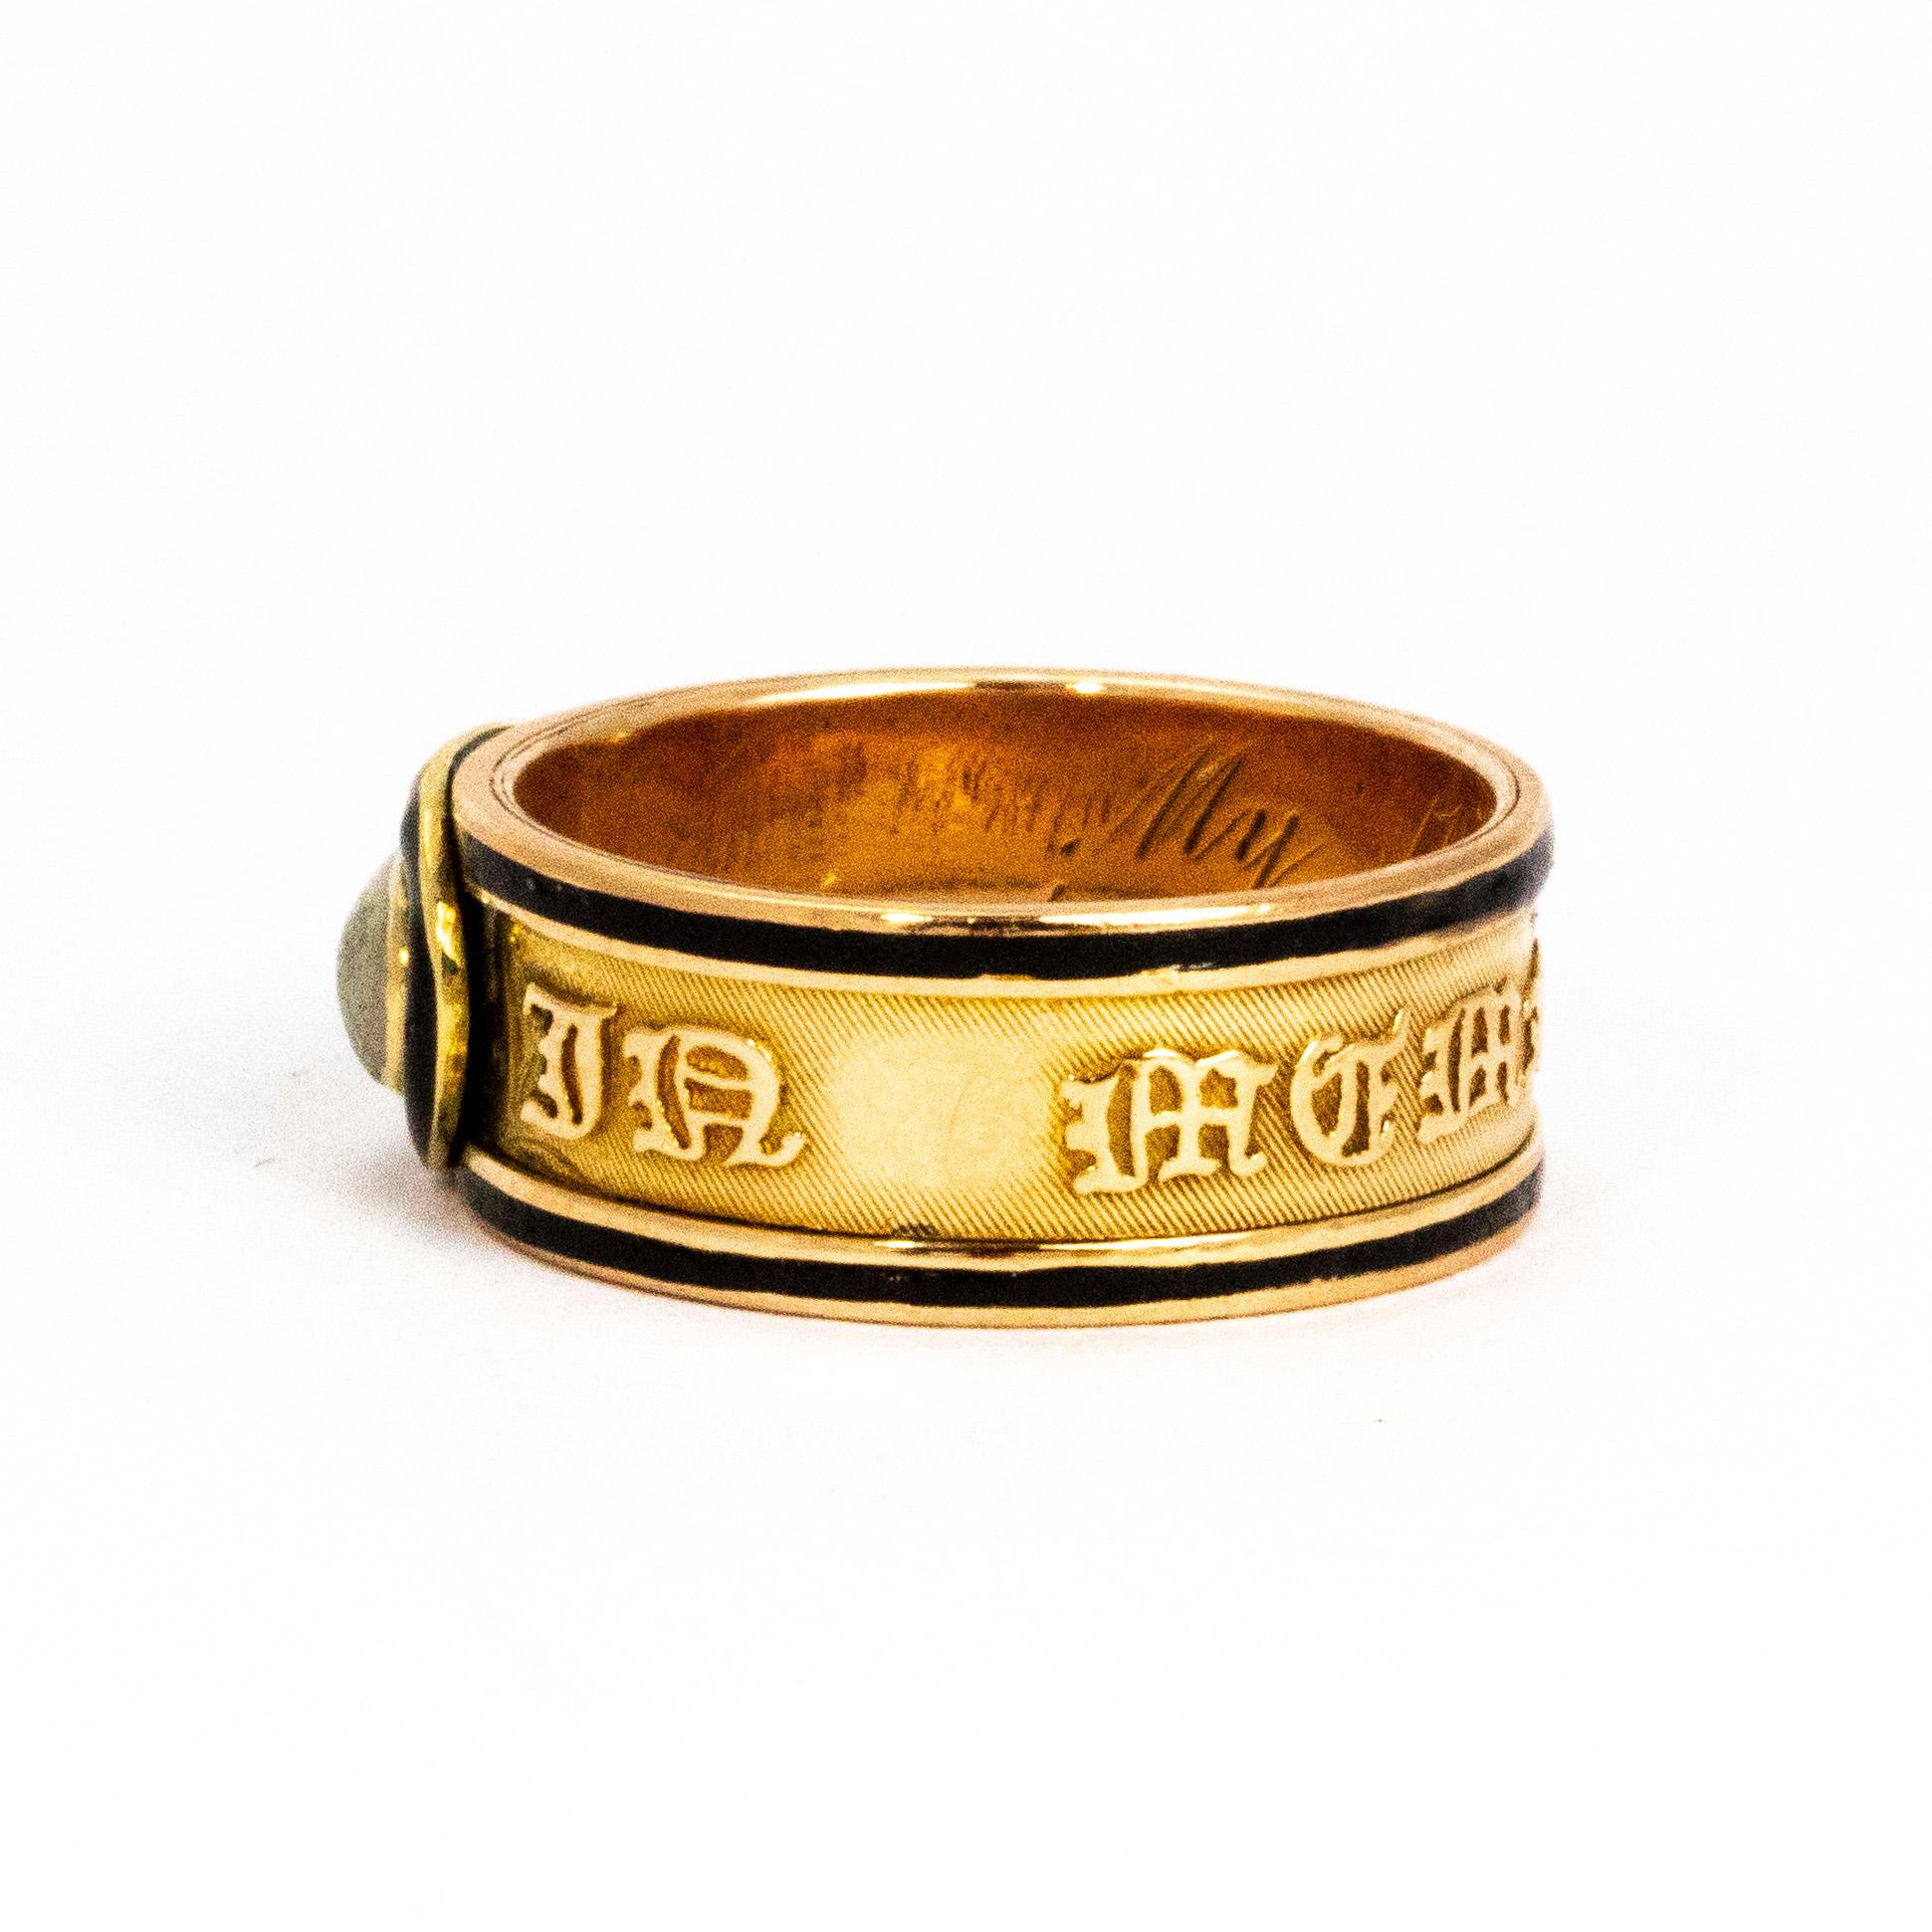 This memorial band is a wonderful example of a Georgian piece of jewellery. The man detail in this ring is the crystal cabochon set into the 18 carat gold band and the black enamel that circles the stone and all the way around the band. The outside